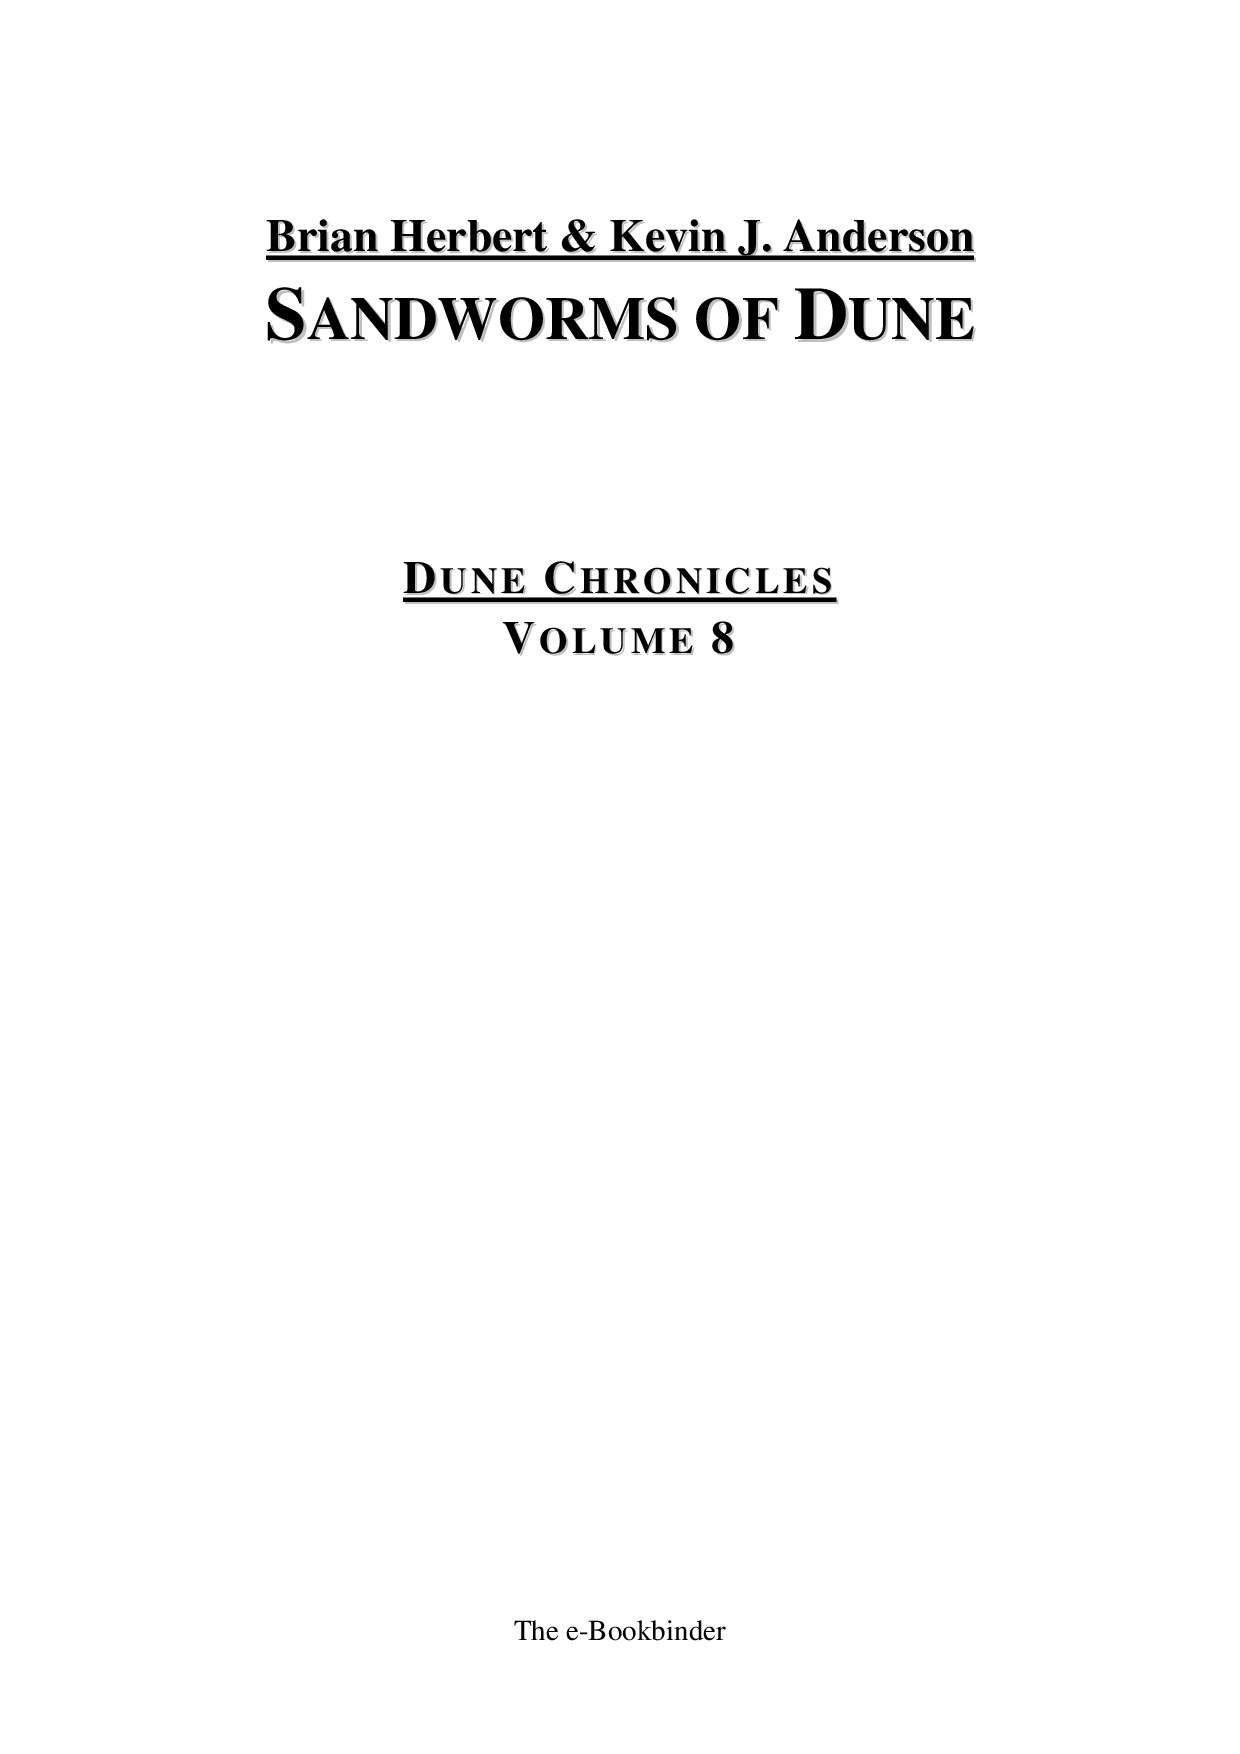 Brian Herbert & Kevin J. Anderson - Dune Chronicles 08 - Sandworms of Dune